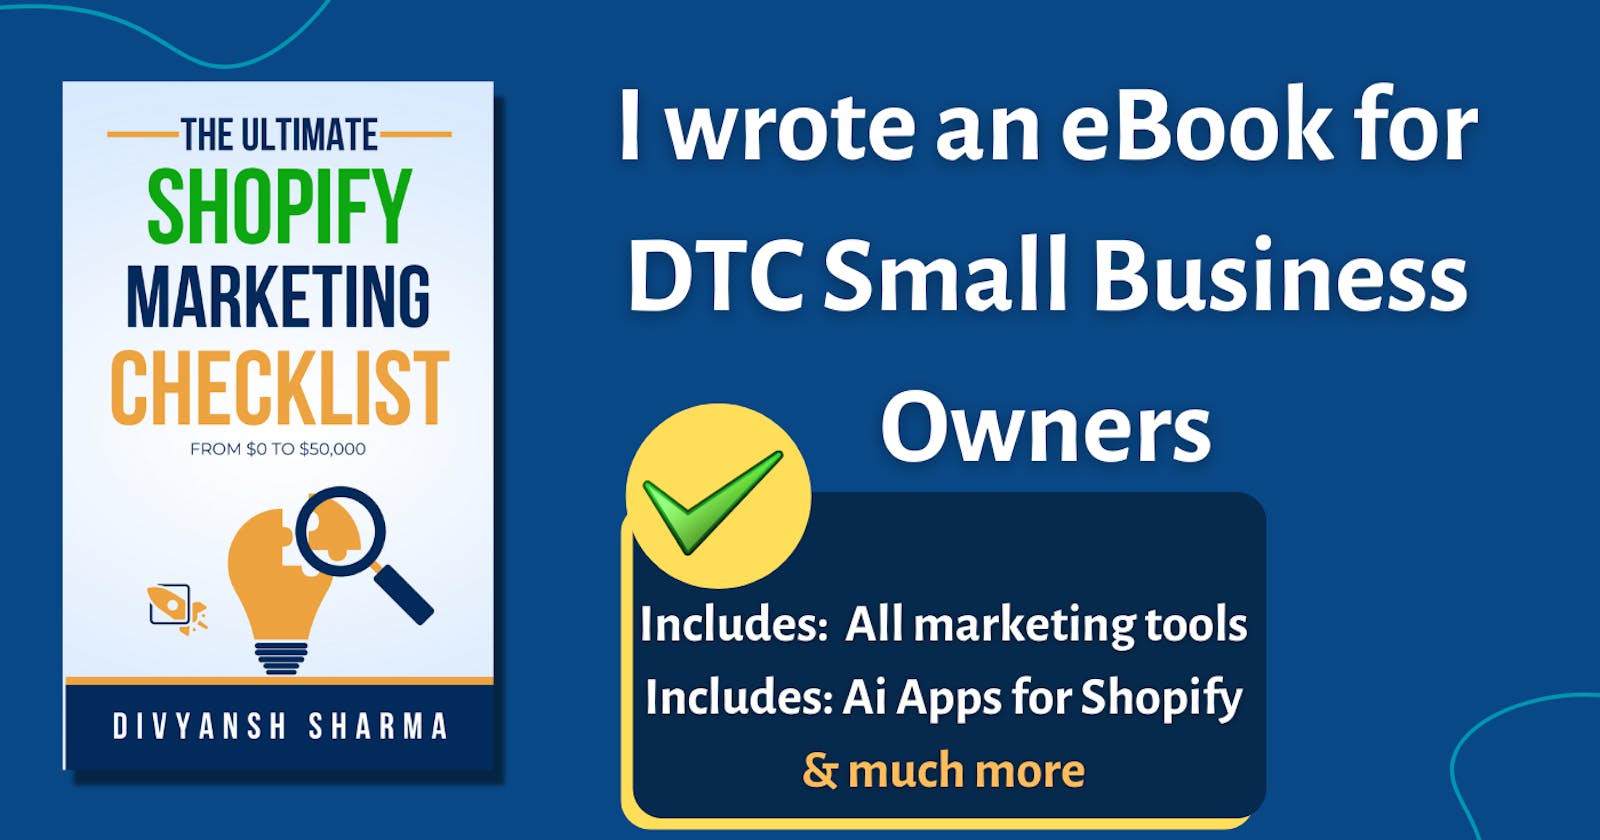 I wrote an eBook for D2C small business owners